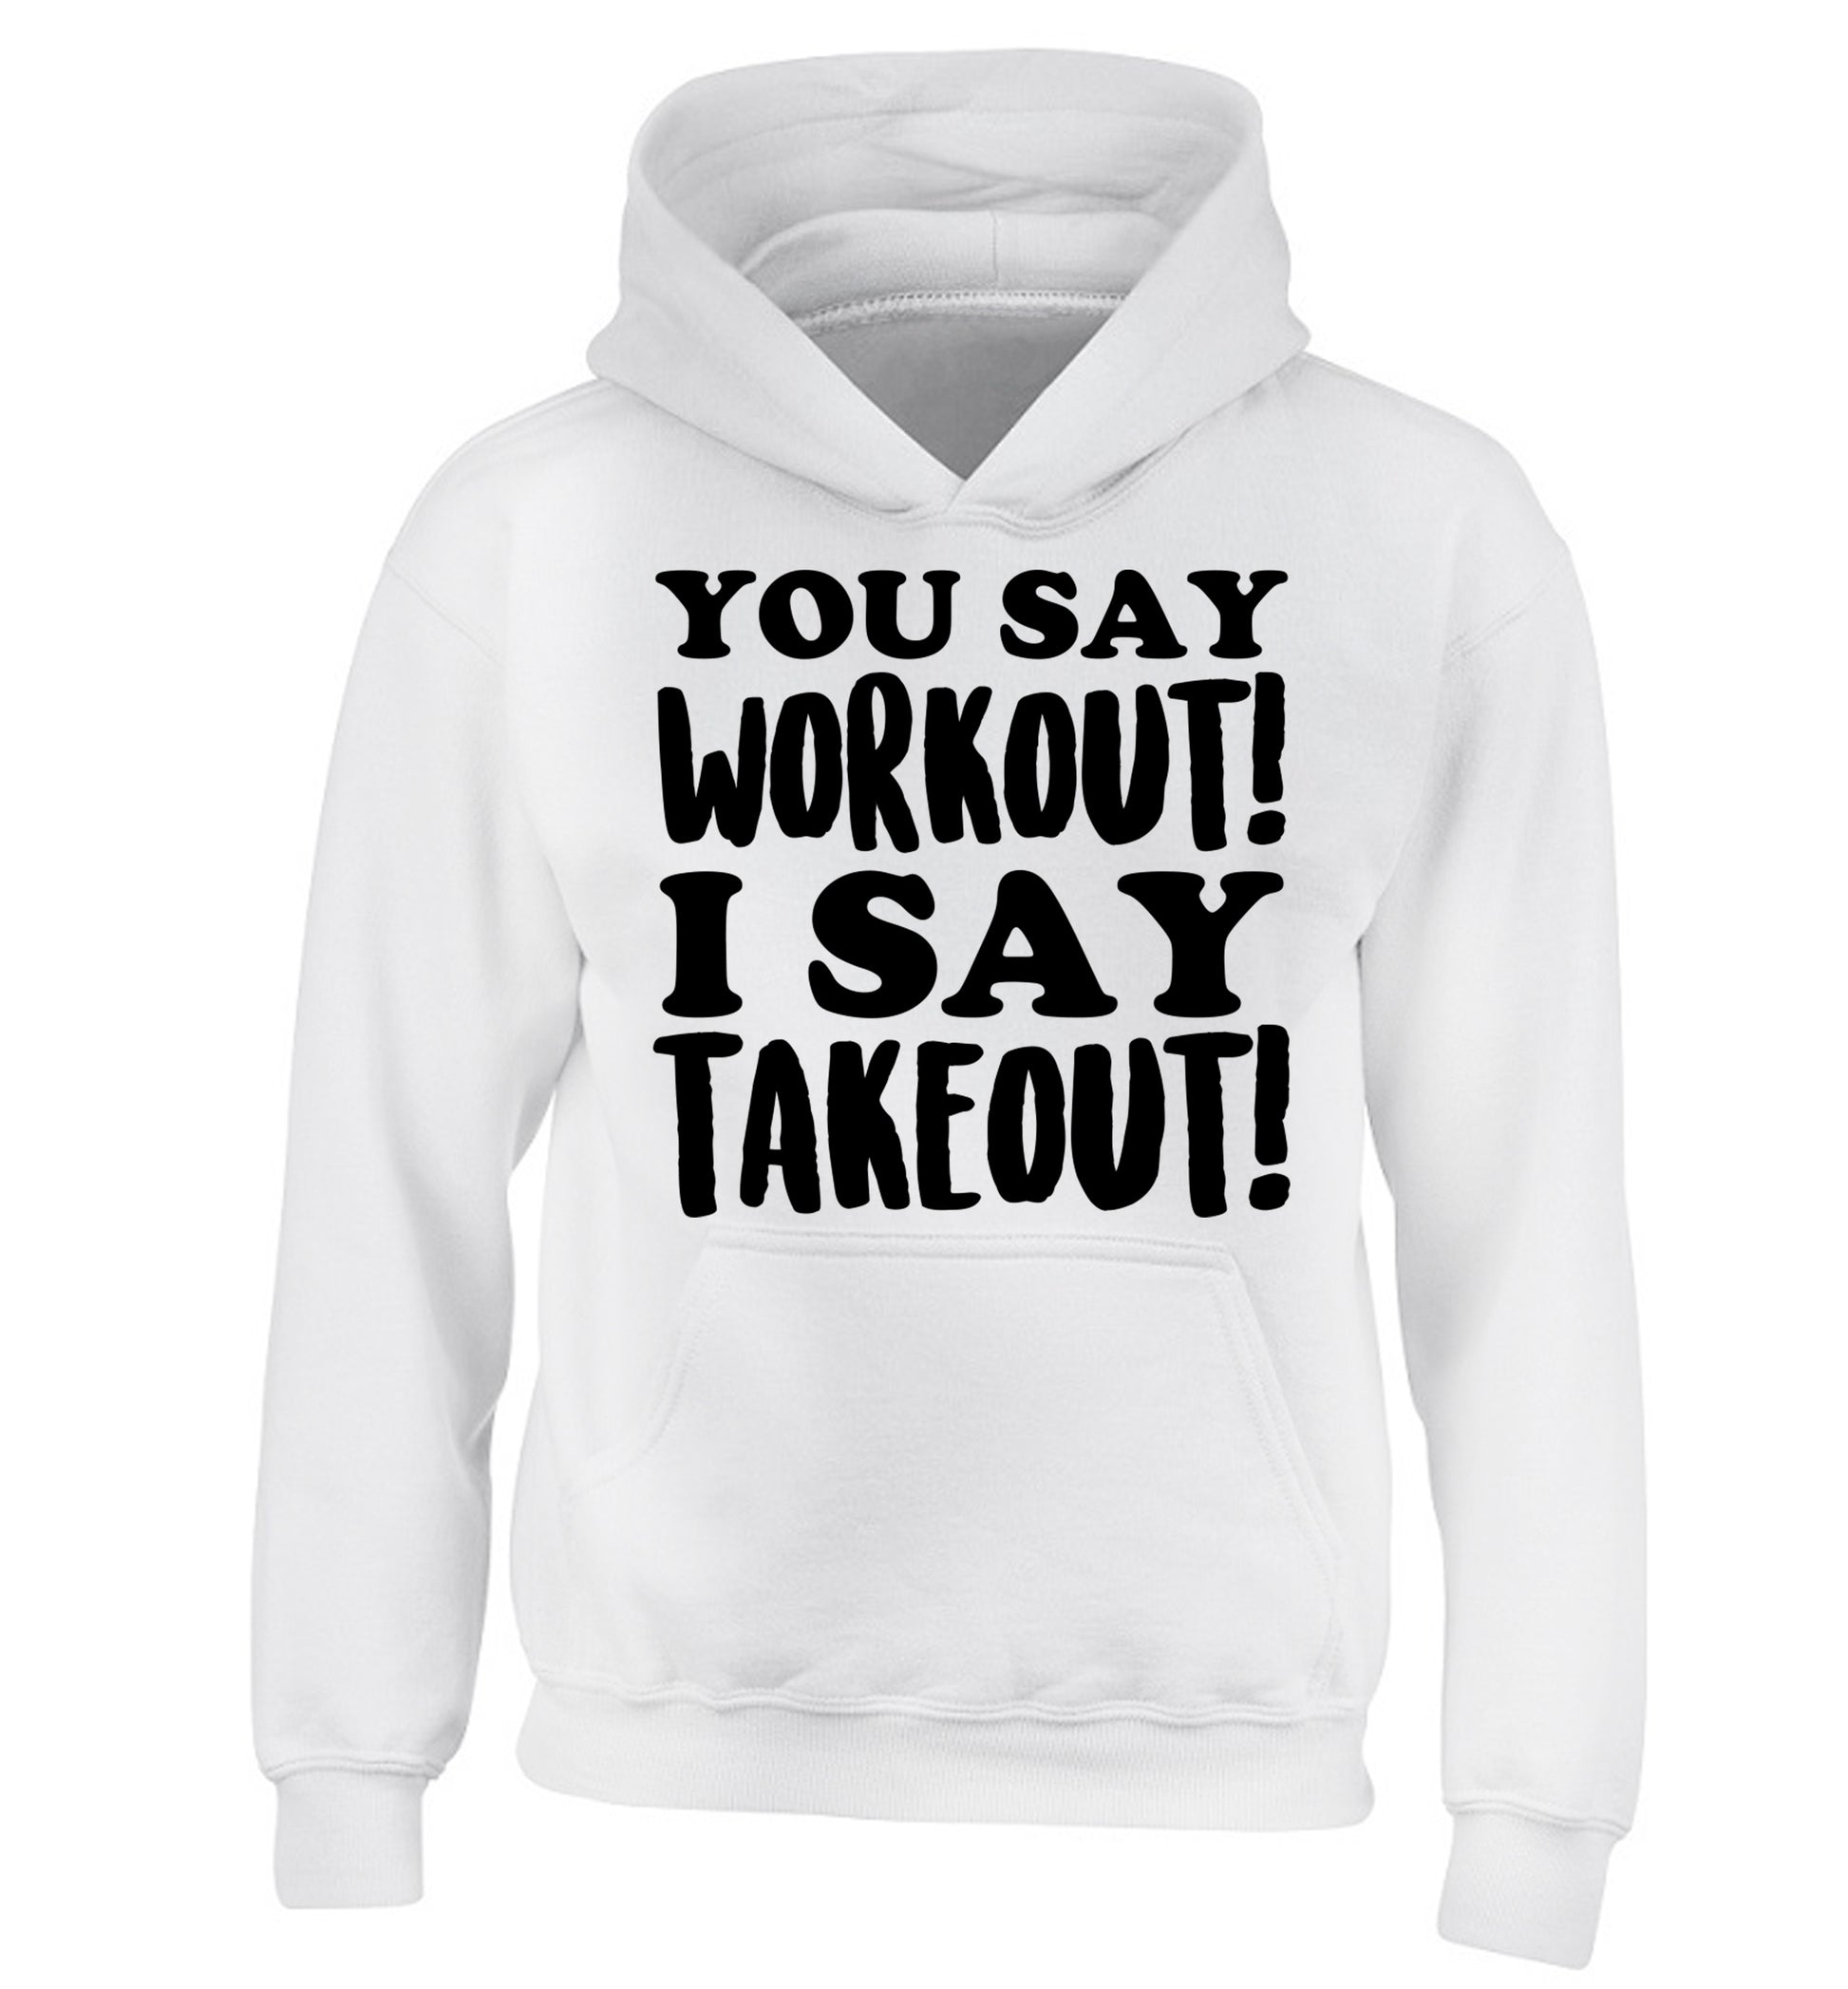 You say workout I say takeout! children's white hoodie 12-14 Years